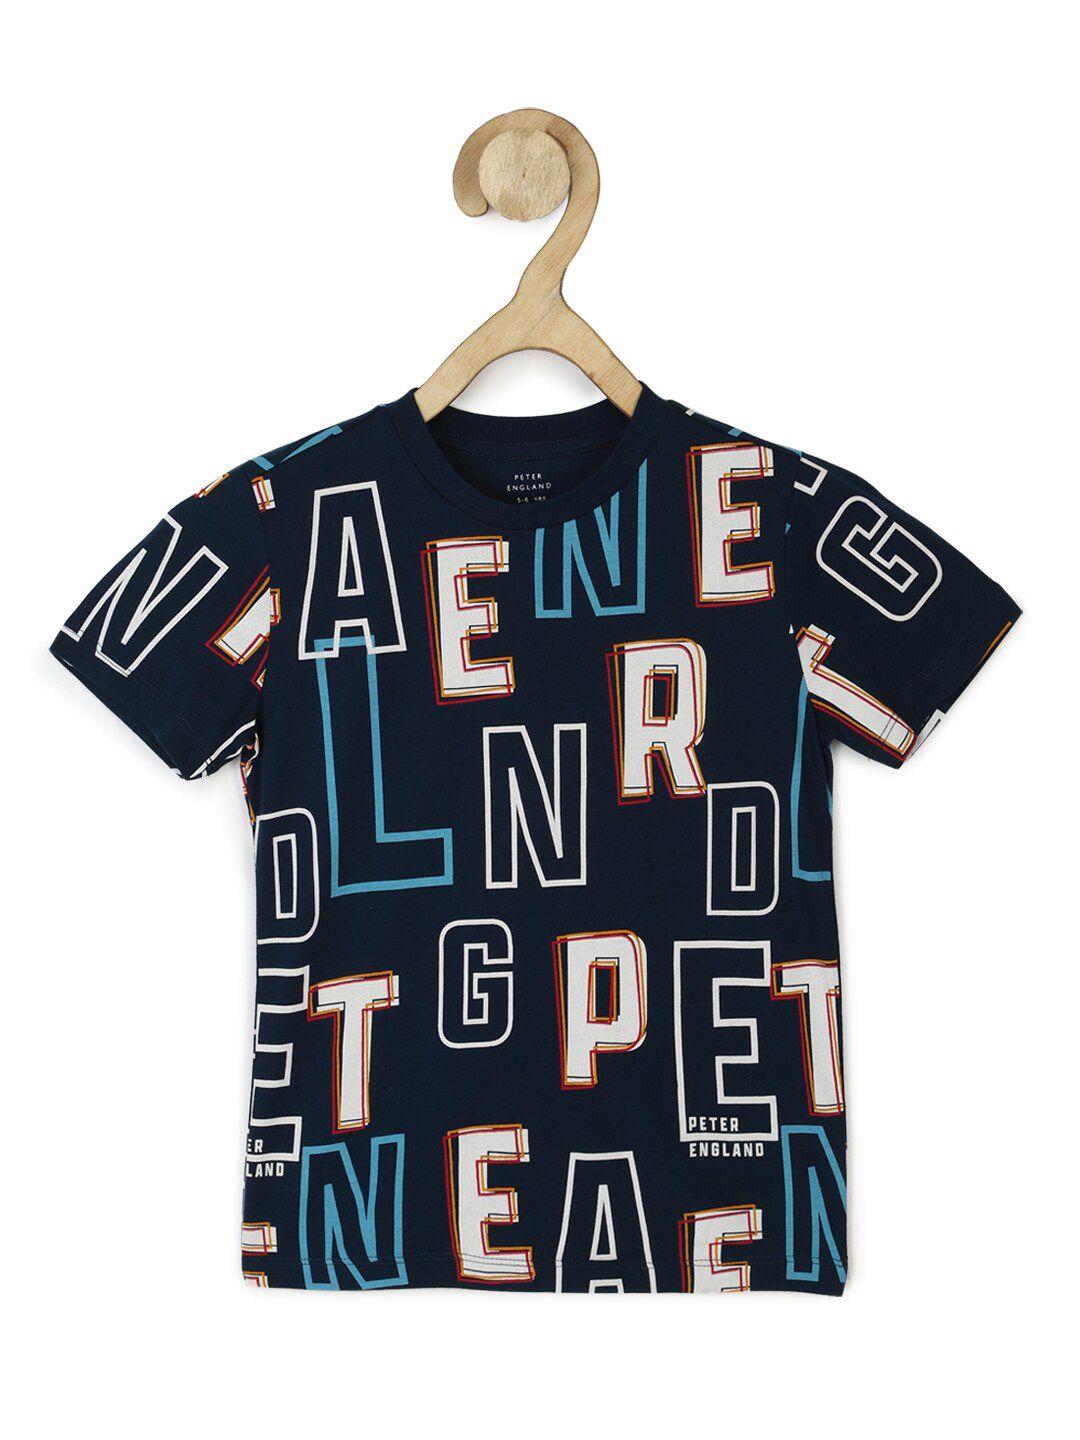 peter england boys navy blue typography printed cotton t-shirt